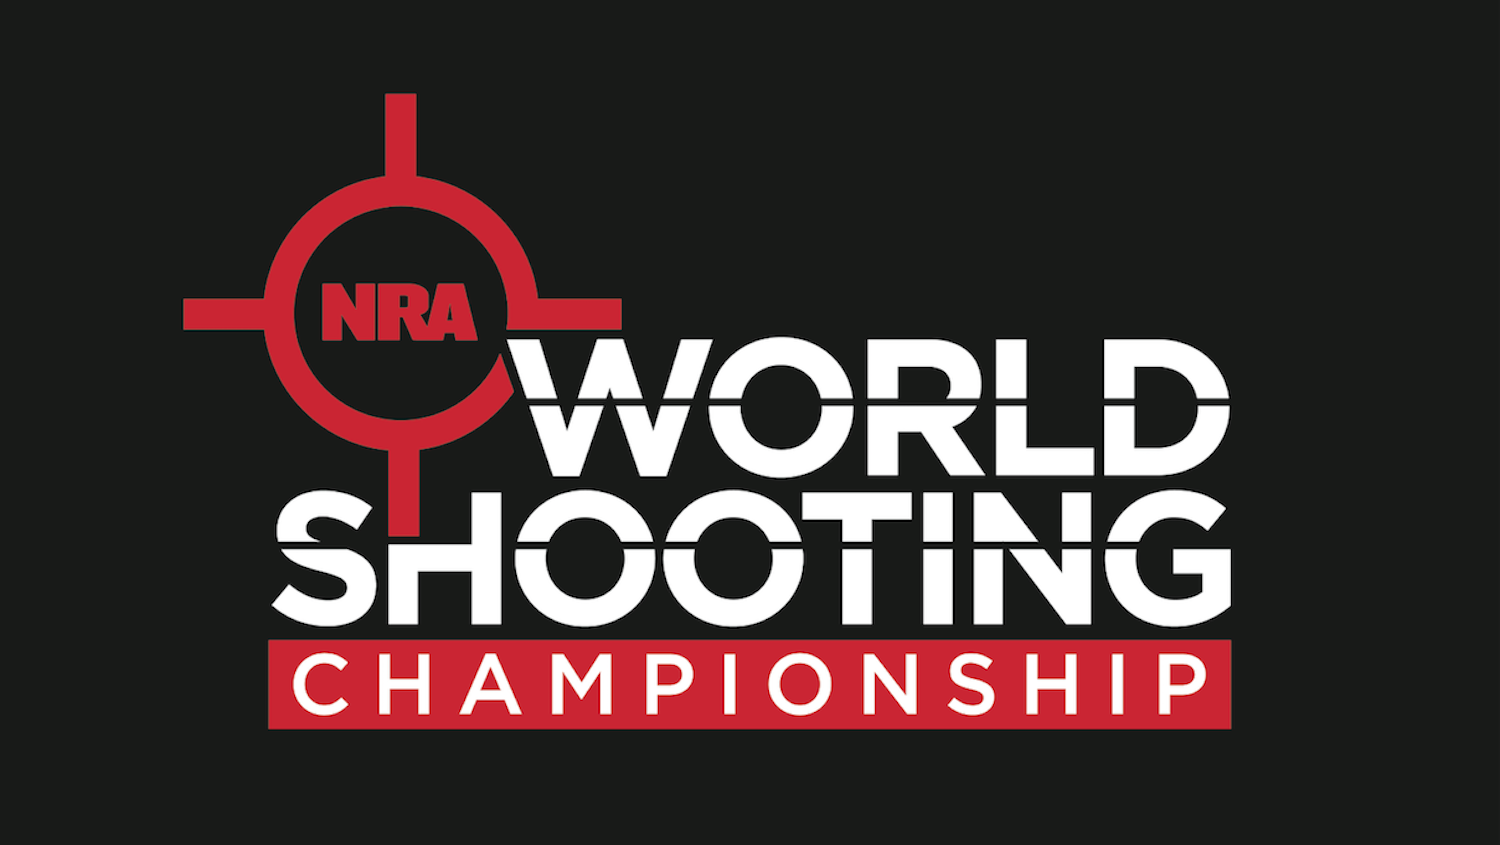 Final Scores From the 2018 NRA World Shooting Championship Presented by Kimber